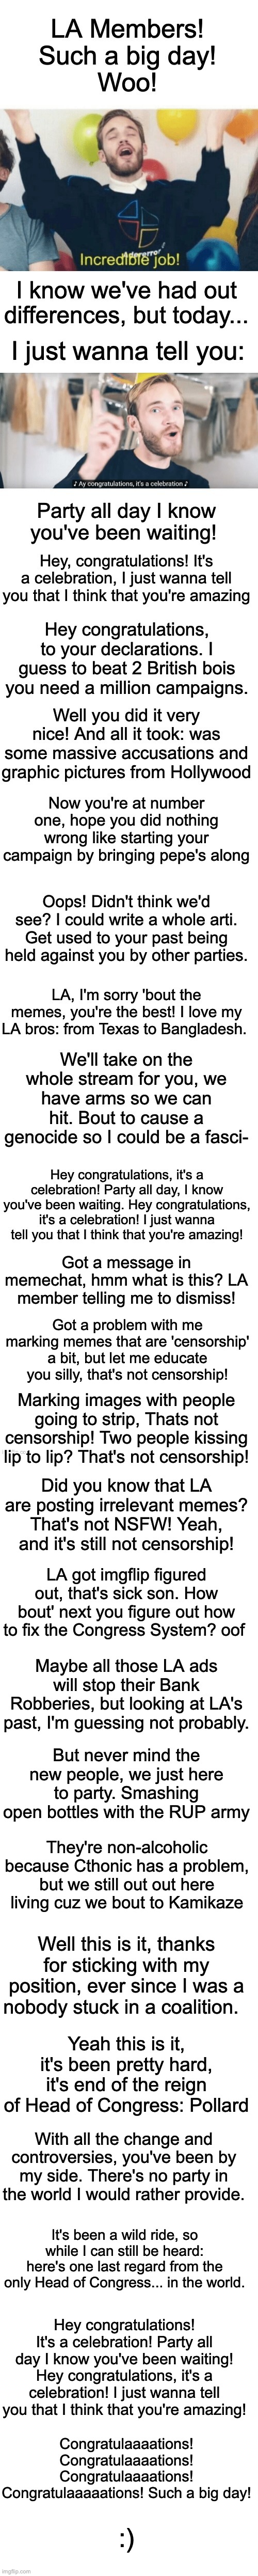 Congratulations. | Got a message in memechat, hmm what is this? LA member telling me to dismiss! Got a problem with me marking memes that are 'censorship' a bit, but let me educate you silly, that's not censorship! Marking images with people going to strip, Thats not censorship! Two people kissing lip to lip? That's not censorship! Did you know that LA are posting irrelevant memes? That's not NSFW! Yeah, and it's still not censorship! LA got imgflip figured out, that's sick son. How bout' next you figure out how to fix the Congress System? oof; Maybe all those LA ads will stop their Bank Robberies, but looking at LA's past, I'm guessing not probably. But never mind the new people, we just here to party. Smashing open bottles with the RUP army; They're non-alcoholic because Cthonic has a problem, but we still out out here living cuz we bout to Kamikaze; Well this is it, thanks for sticking with my position, ever since I was a nobody stuck in a coalition. Yeah this is it, it's been pretty hard, it's end of the reign of Head of Congress: Pollard; With all the change and controversies, you've been by my side. There's no party in the world I would rather provide. It's been a wild ride, so while I can still be heard: here's one last regard from the only Head of Congress... in the world. Hey congratulations! It's a celebration! Party all day I know you've been waiting! Hey congratulations, it's a celebration! I just wanna tell you that I think that you're amazing! Congratulaaaations! Congratulaaaations! Congratulaaaations! Congratulaaaaations! Such a big day! :) | image tagged in memes,unfunny,congratulations | made w/ Imgflip meme maker